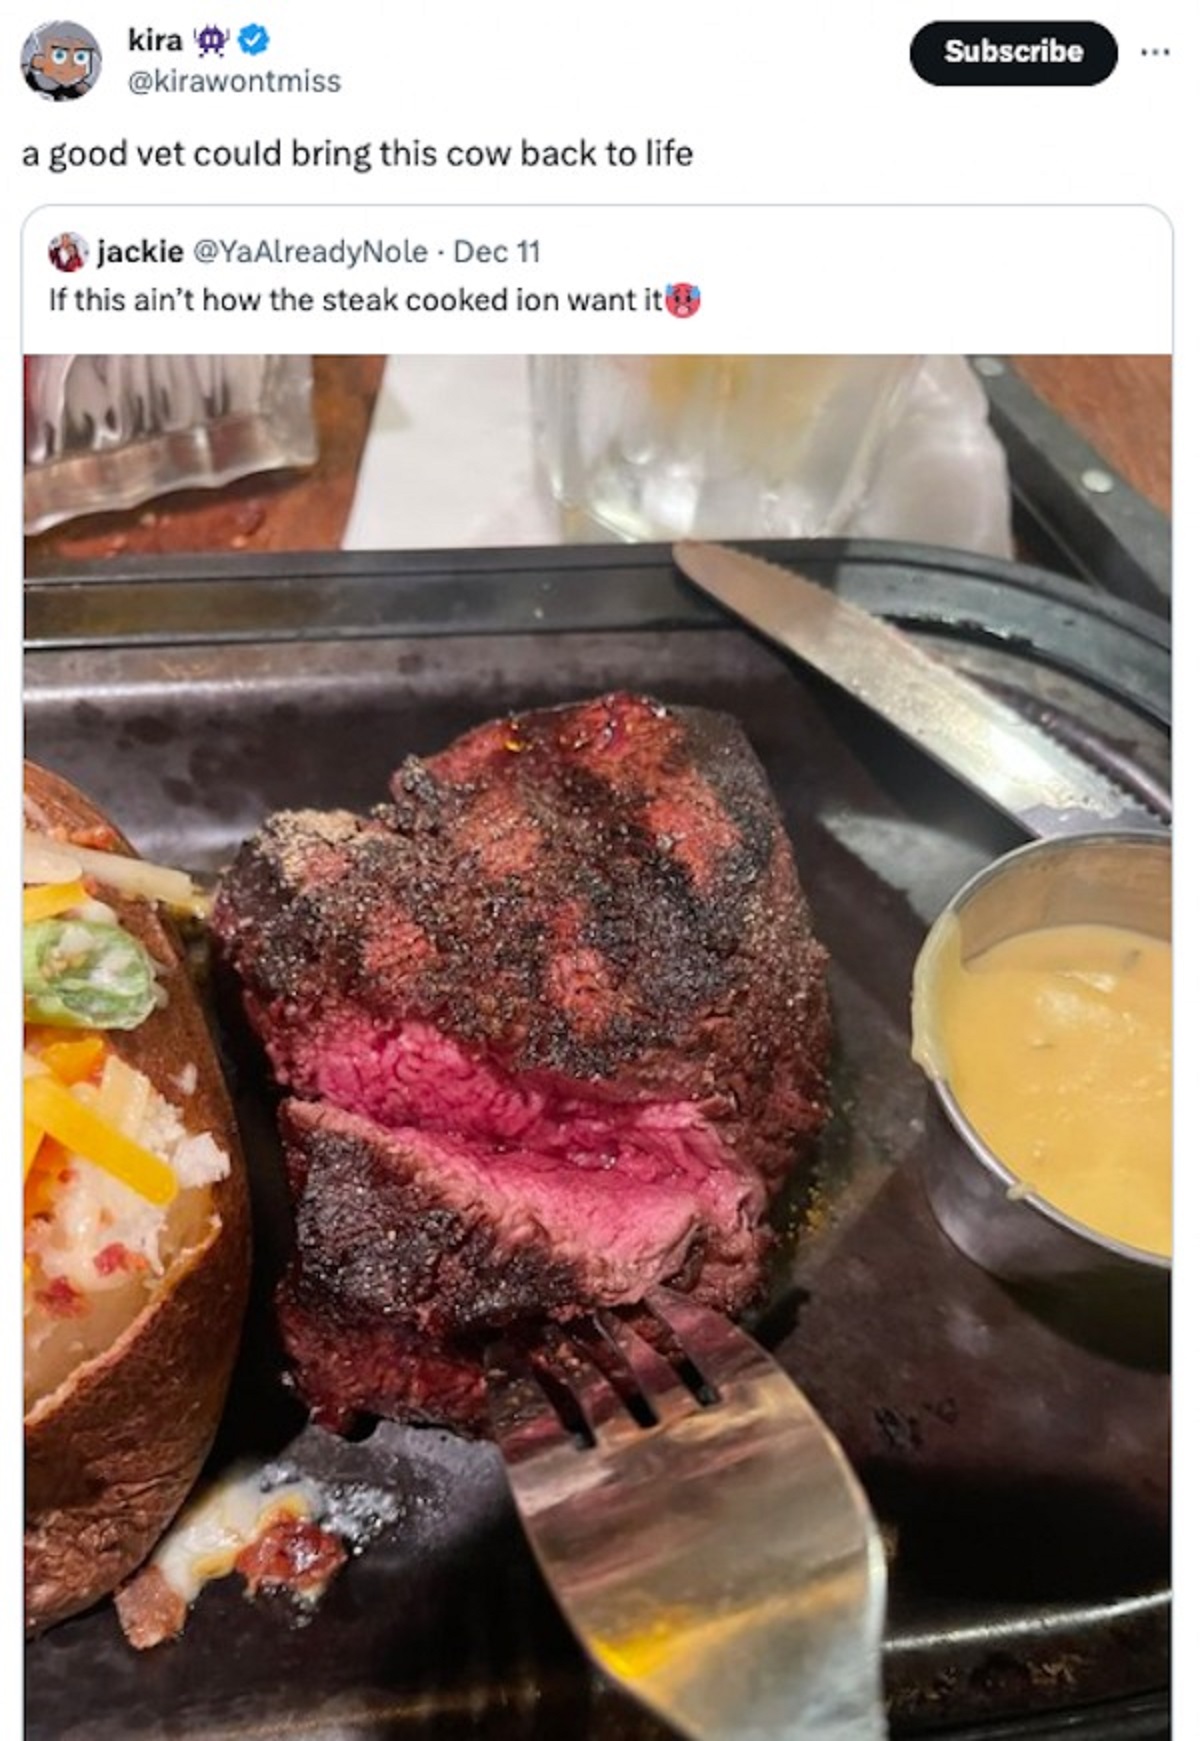 roast beef - kira a good vet could bring this cow back to life jackie Dec 11 If this ain't how the steak cooked ion want it Subscribe